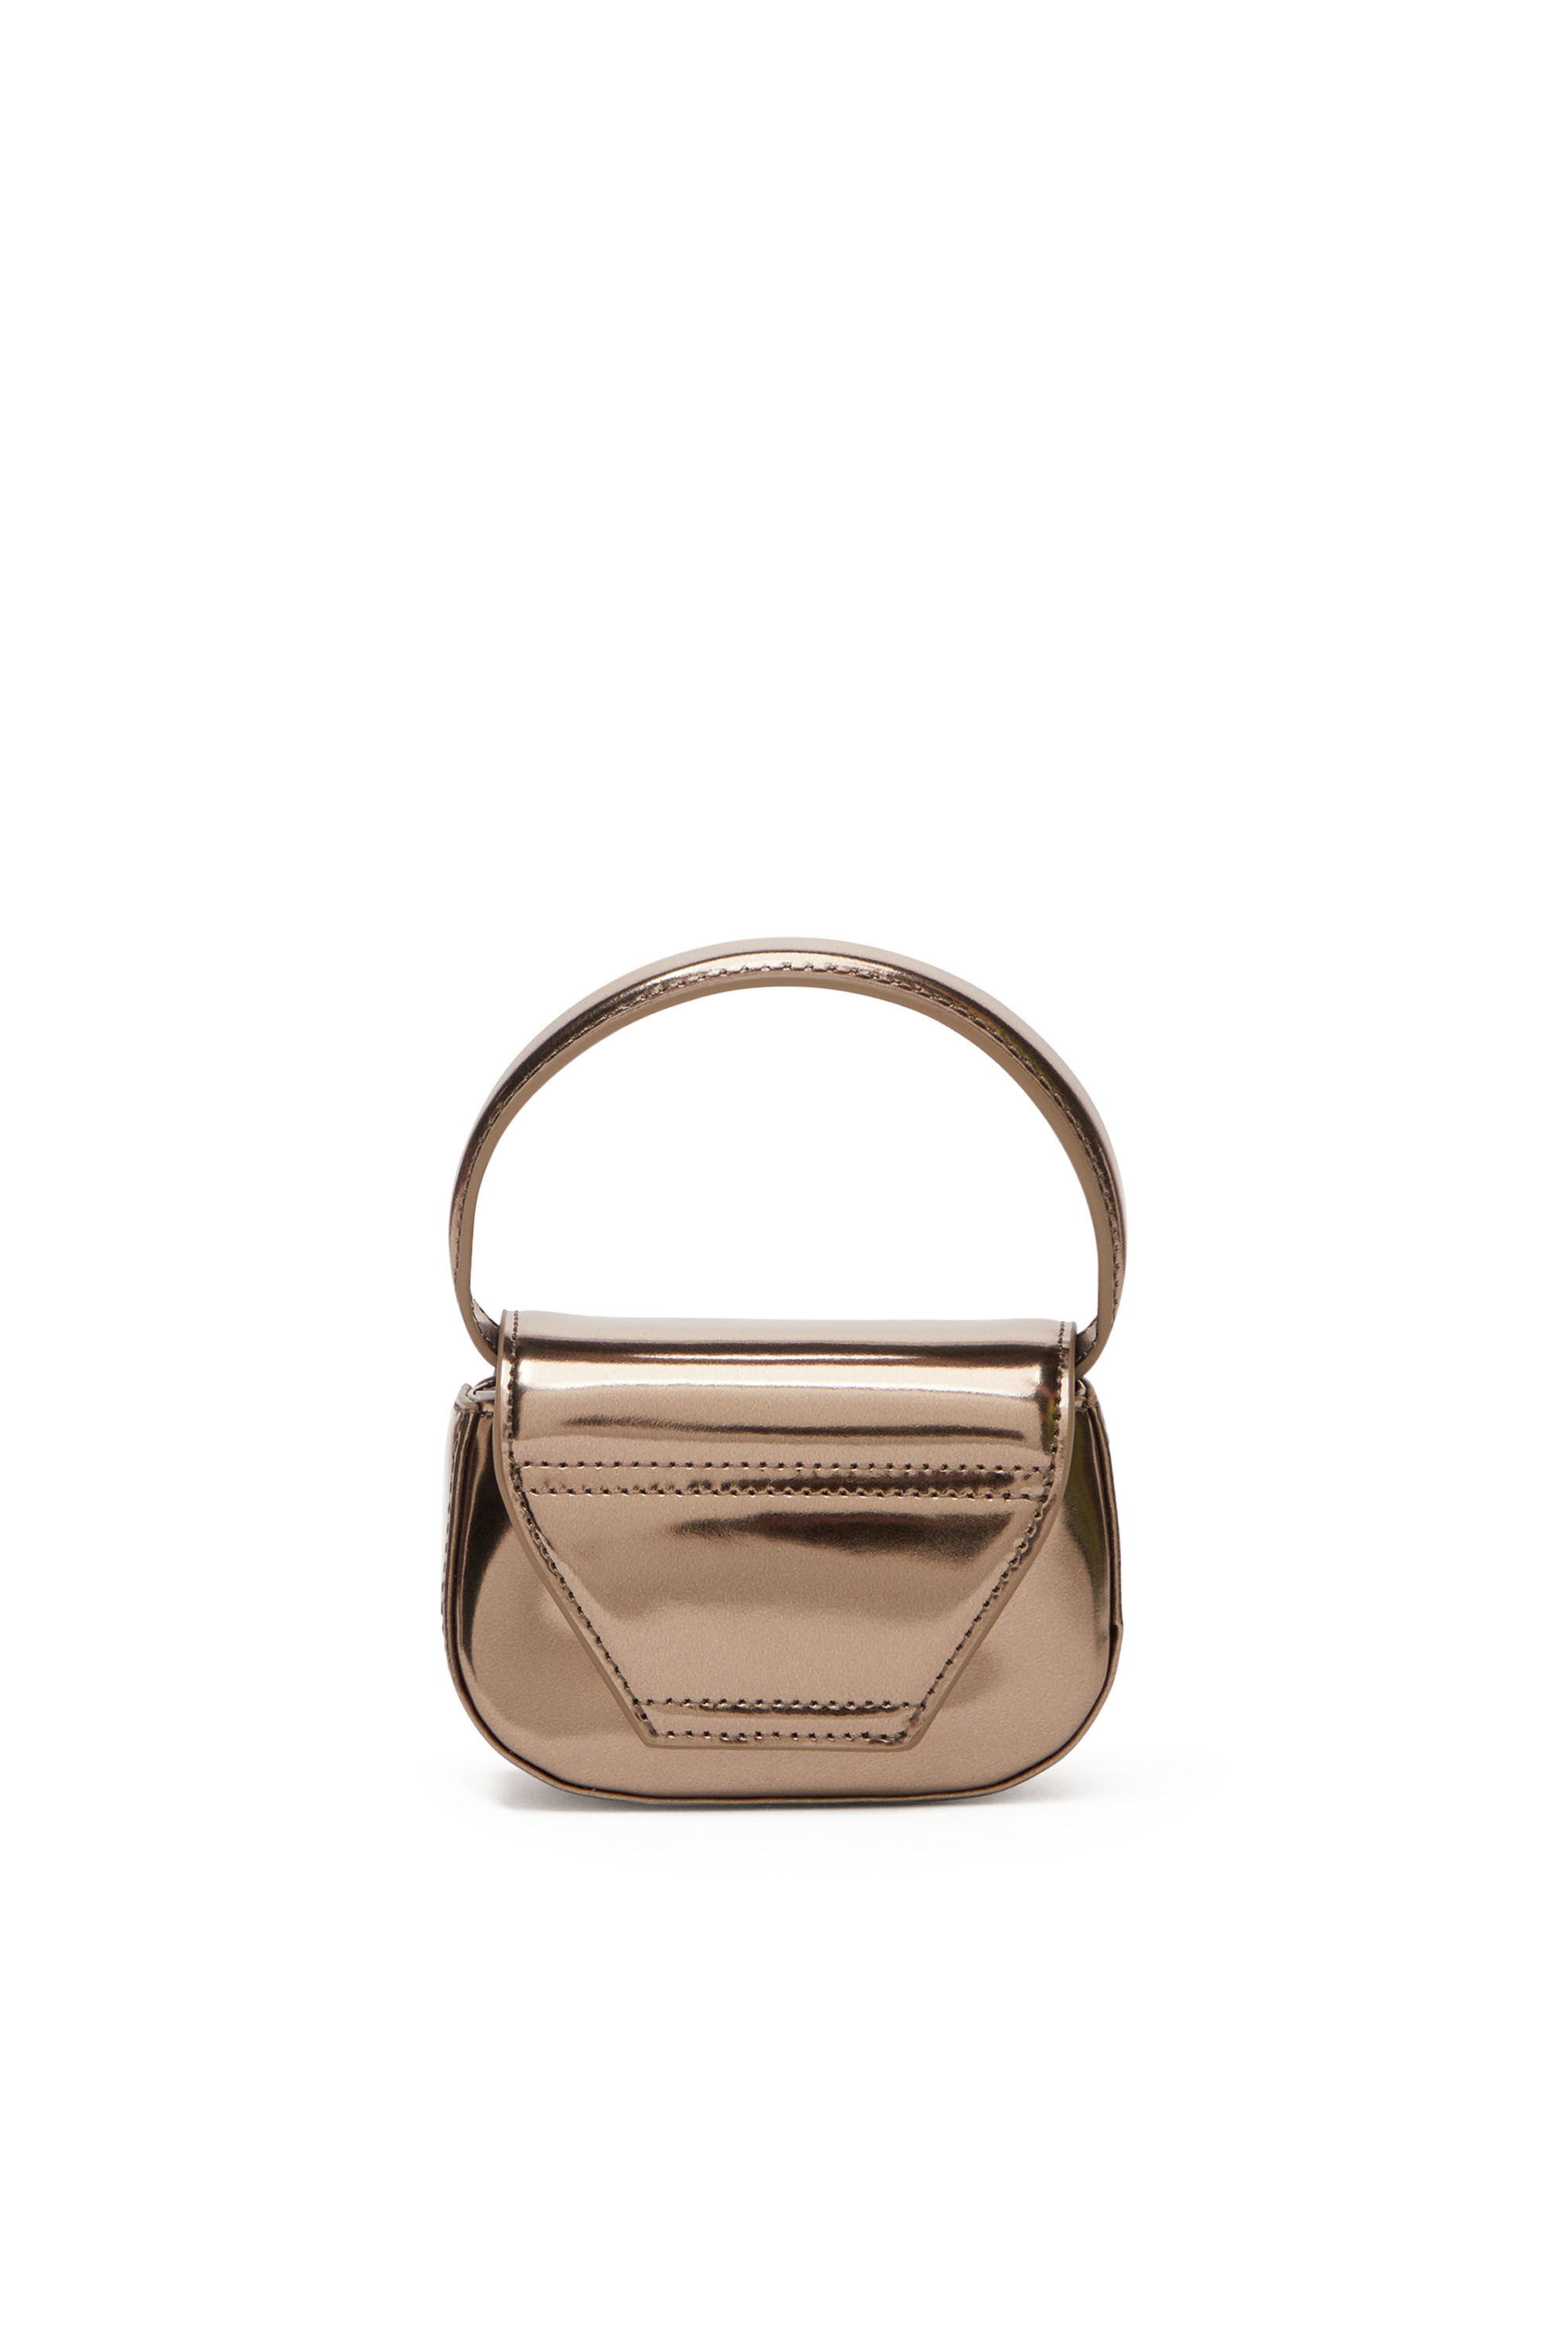 1DR-XS-S Woman: Mini bag in mirrored leather | Diesel